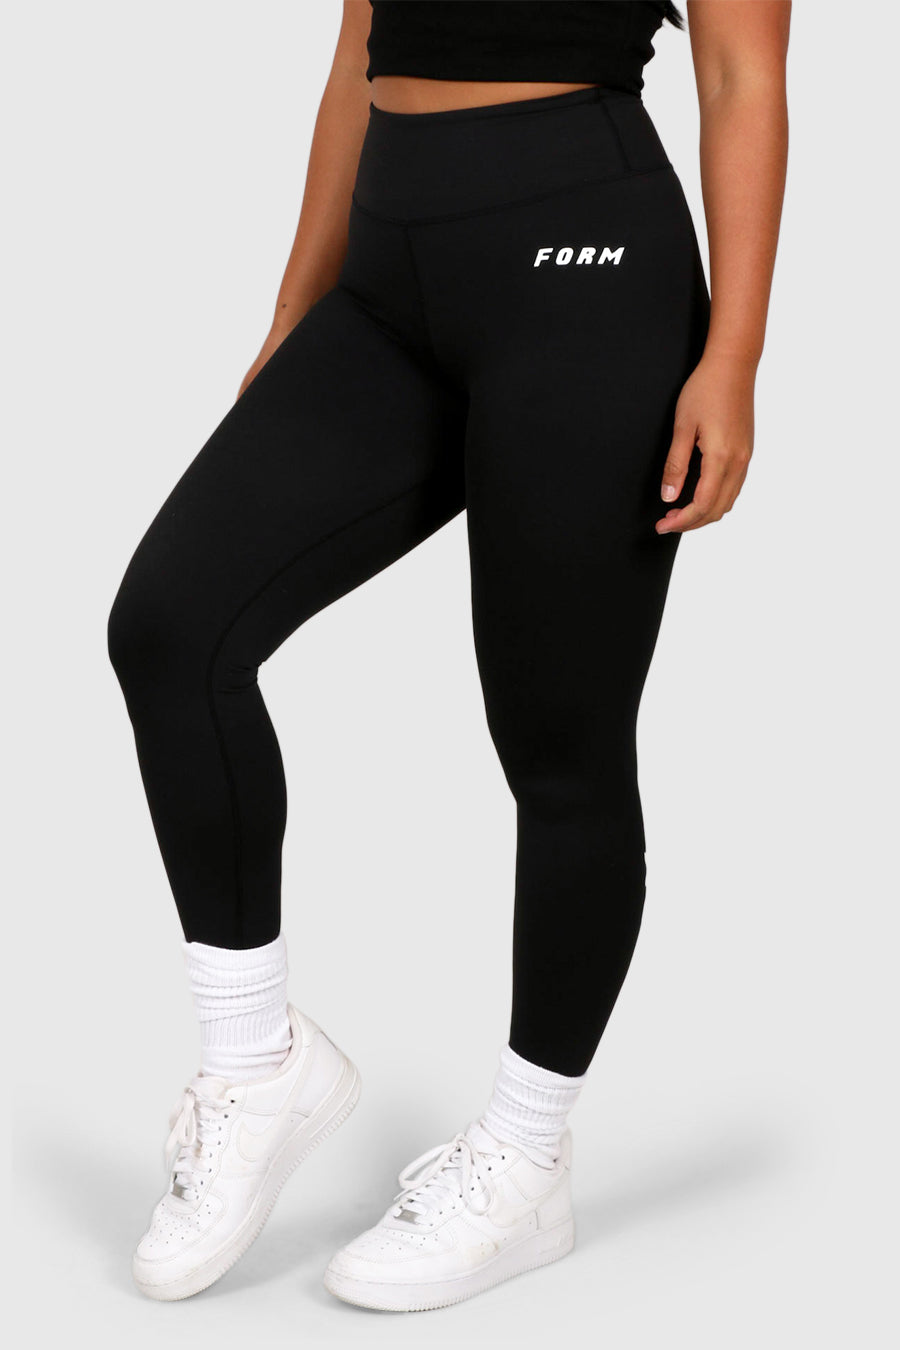 Under Armour, Pants & Jumpsuits, Used Under Armour Leggings